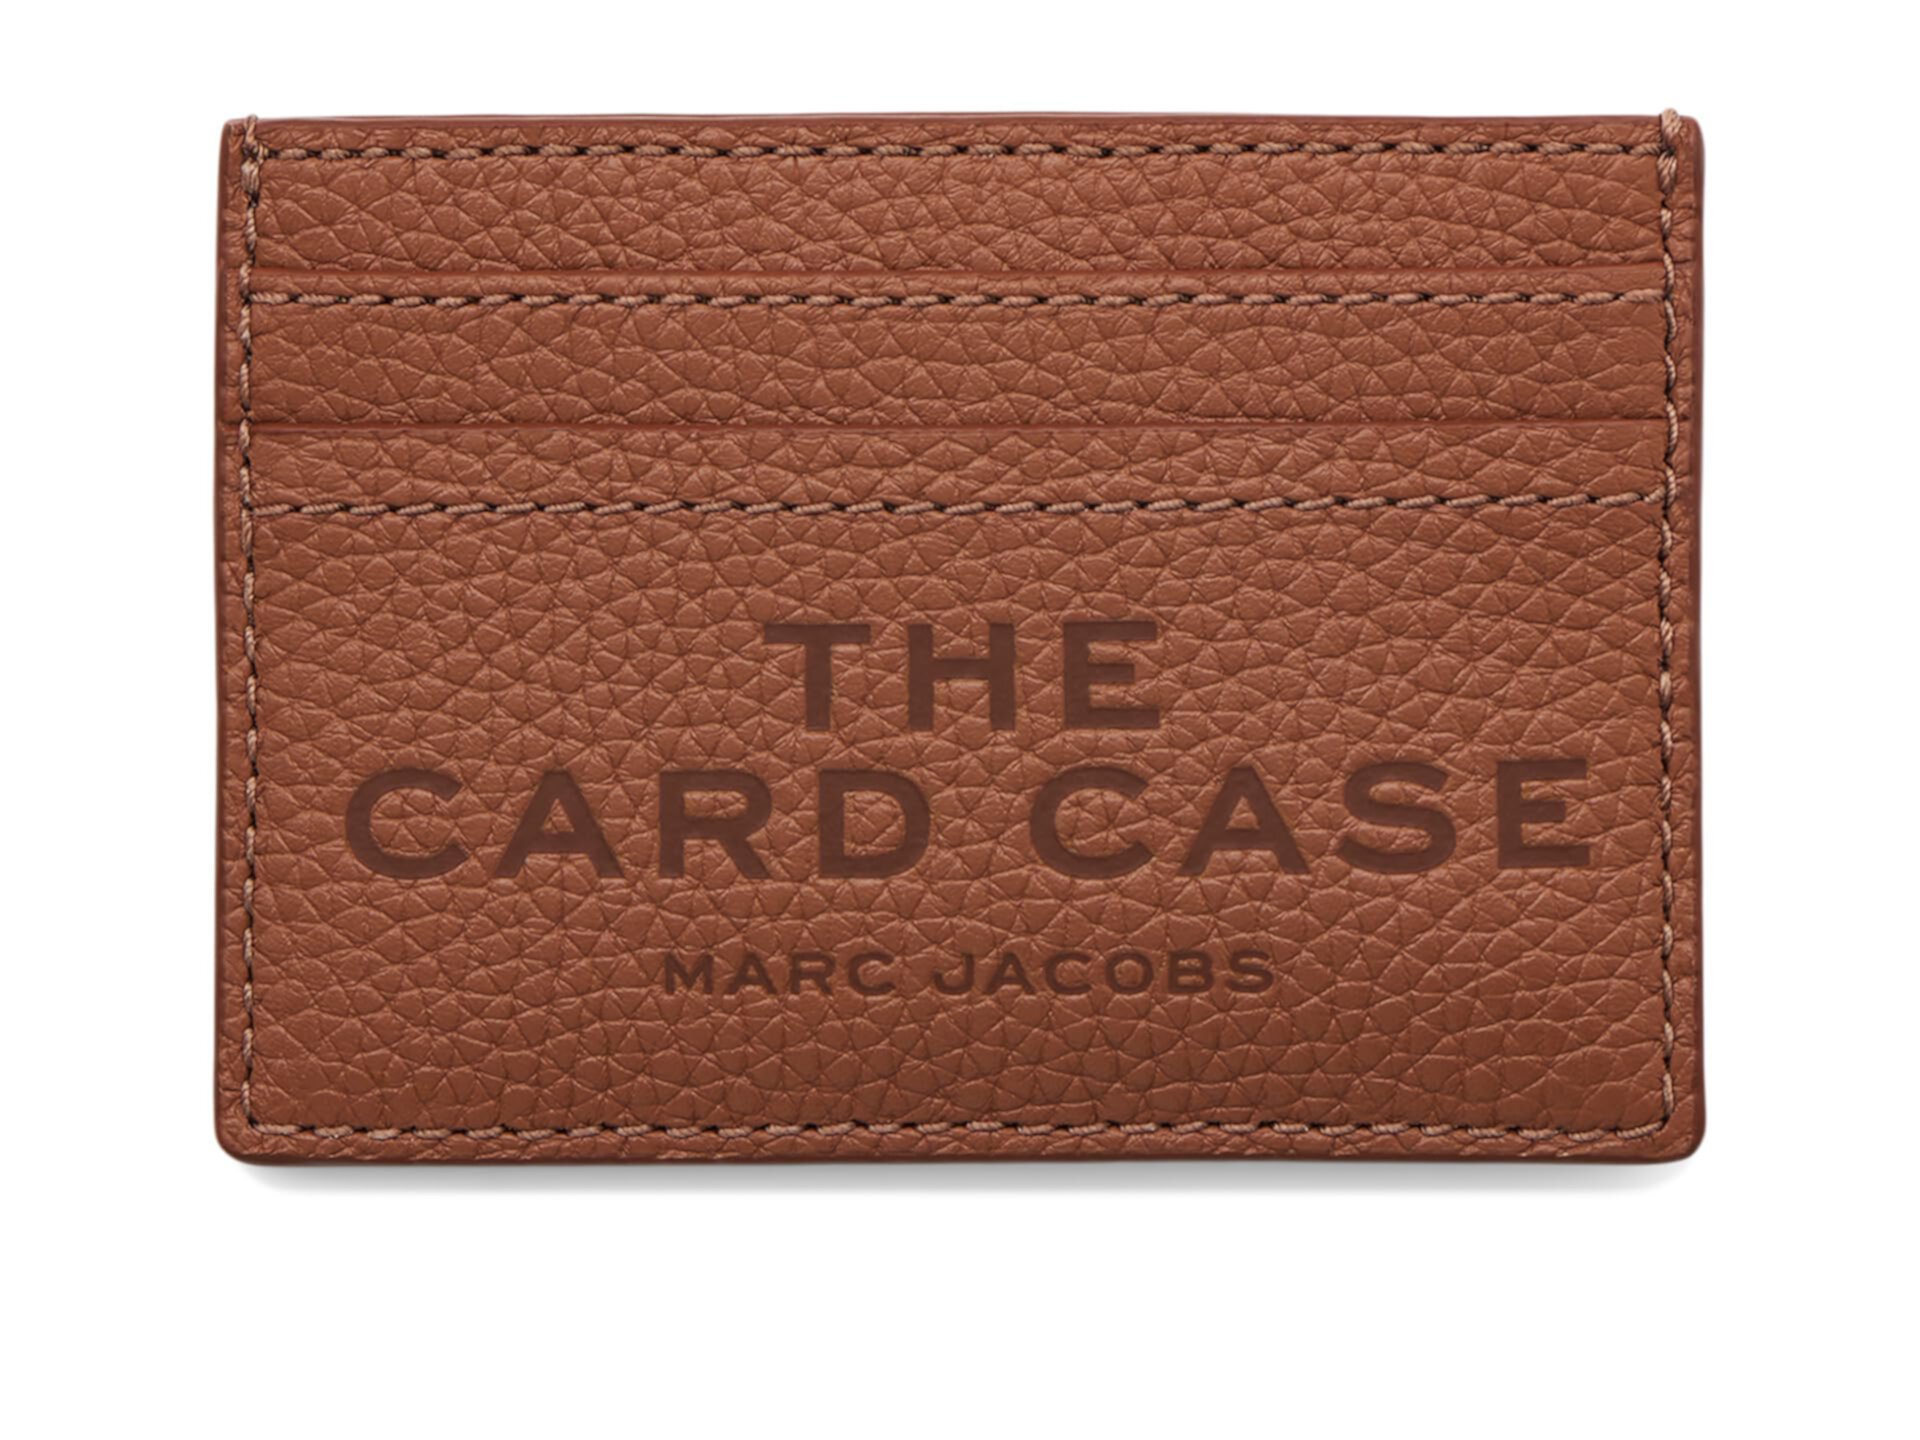 The Leather Card Case Marc Jacobs